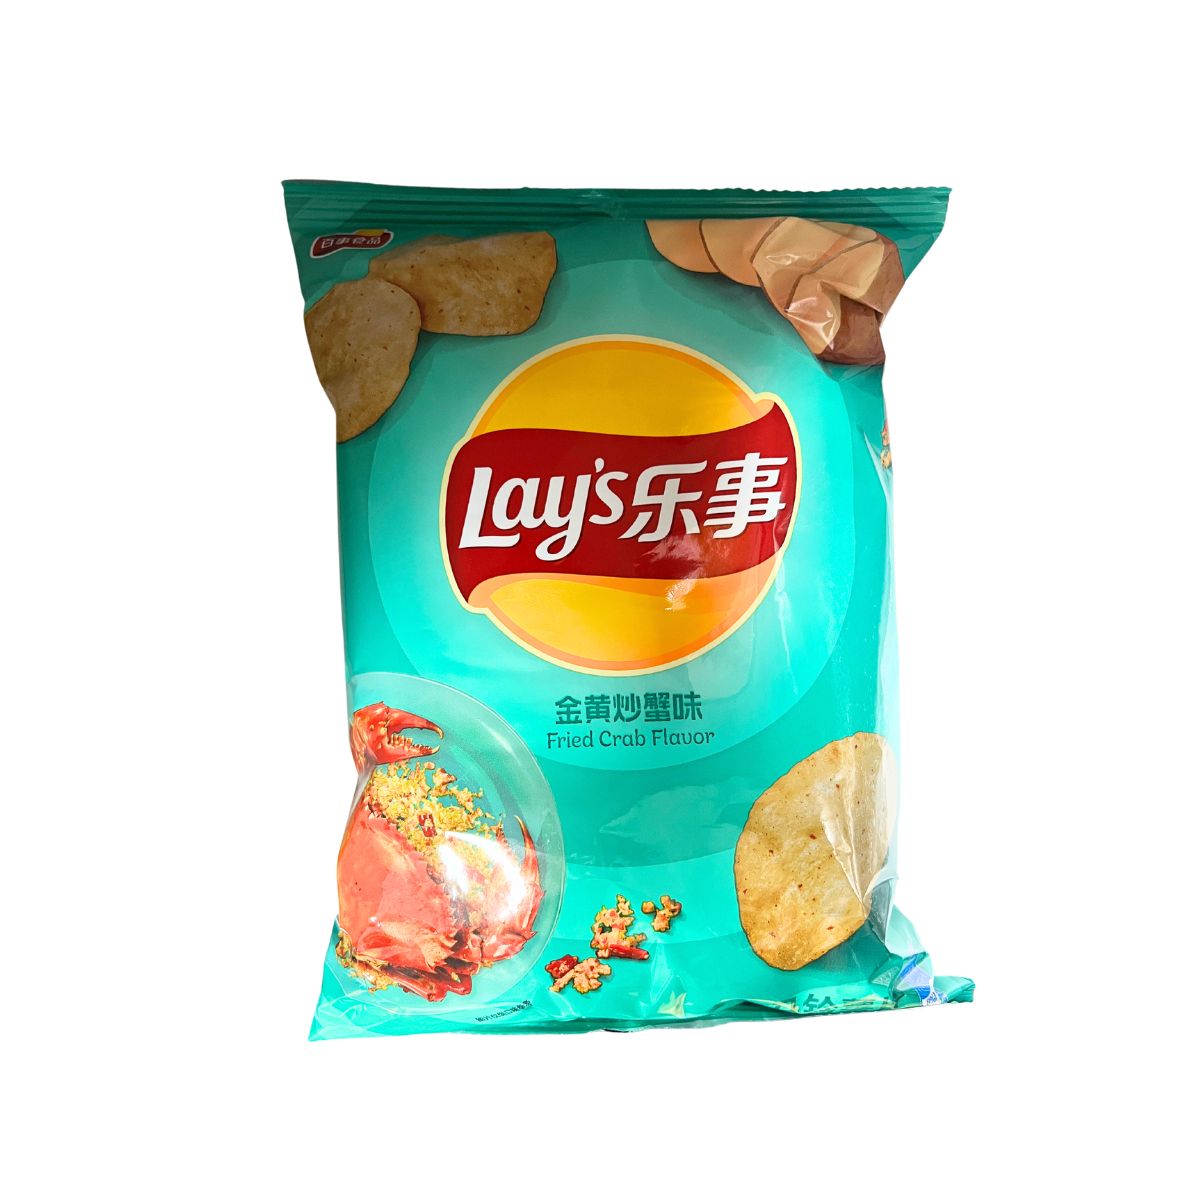 Lays Fried Crab Flavor